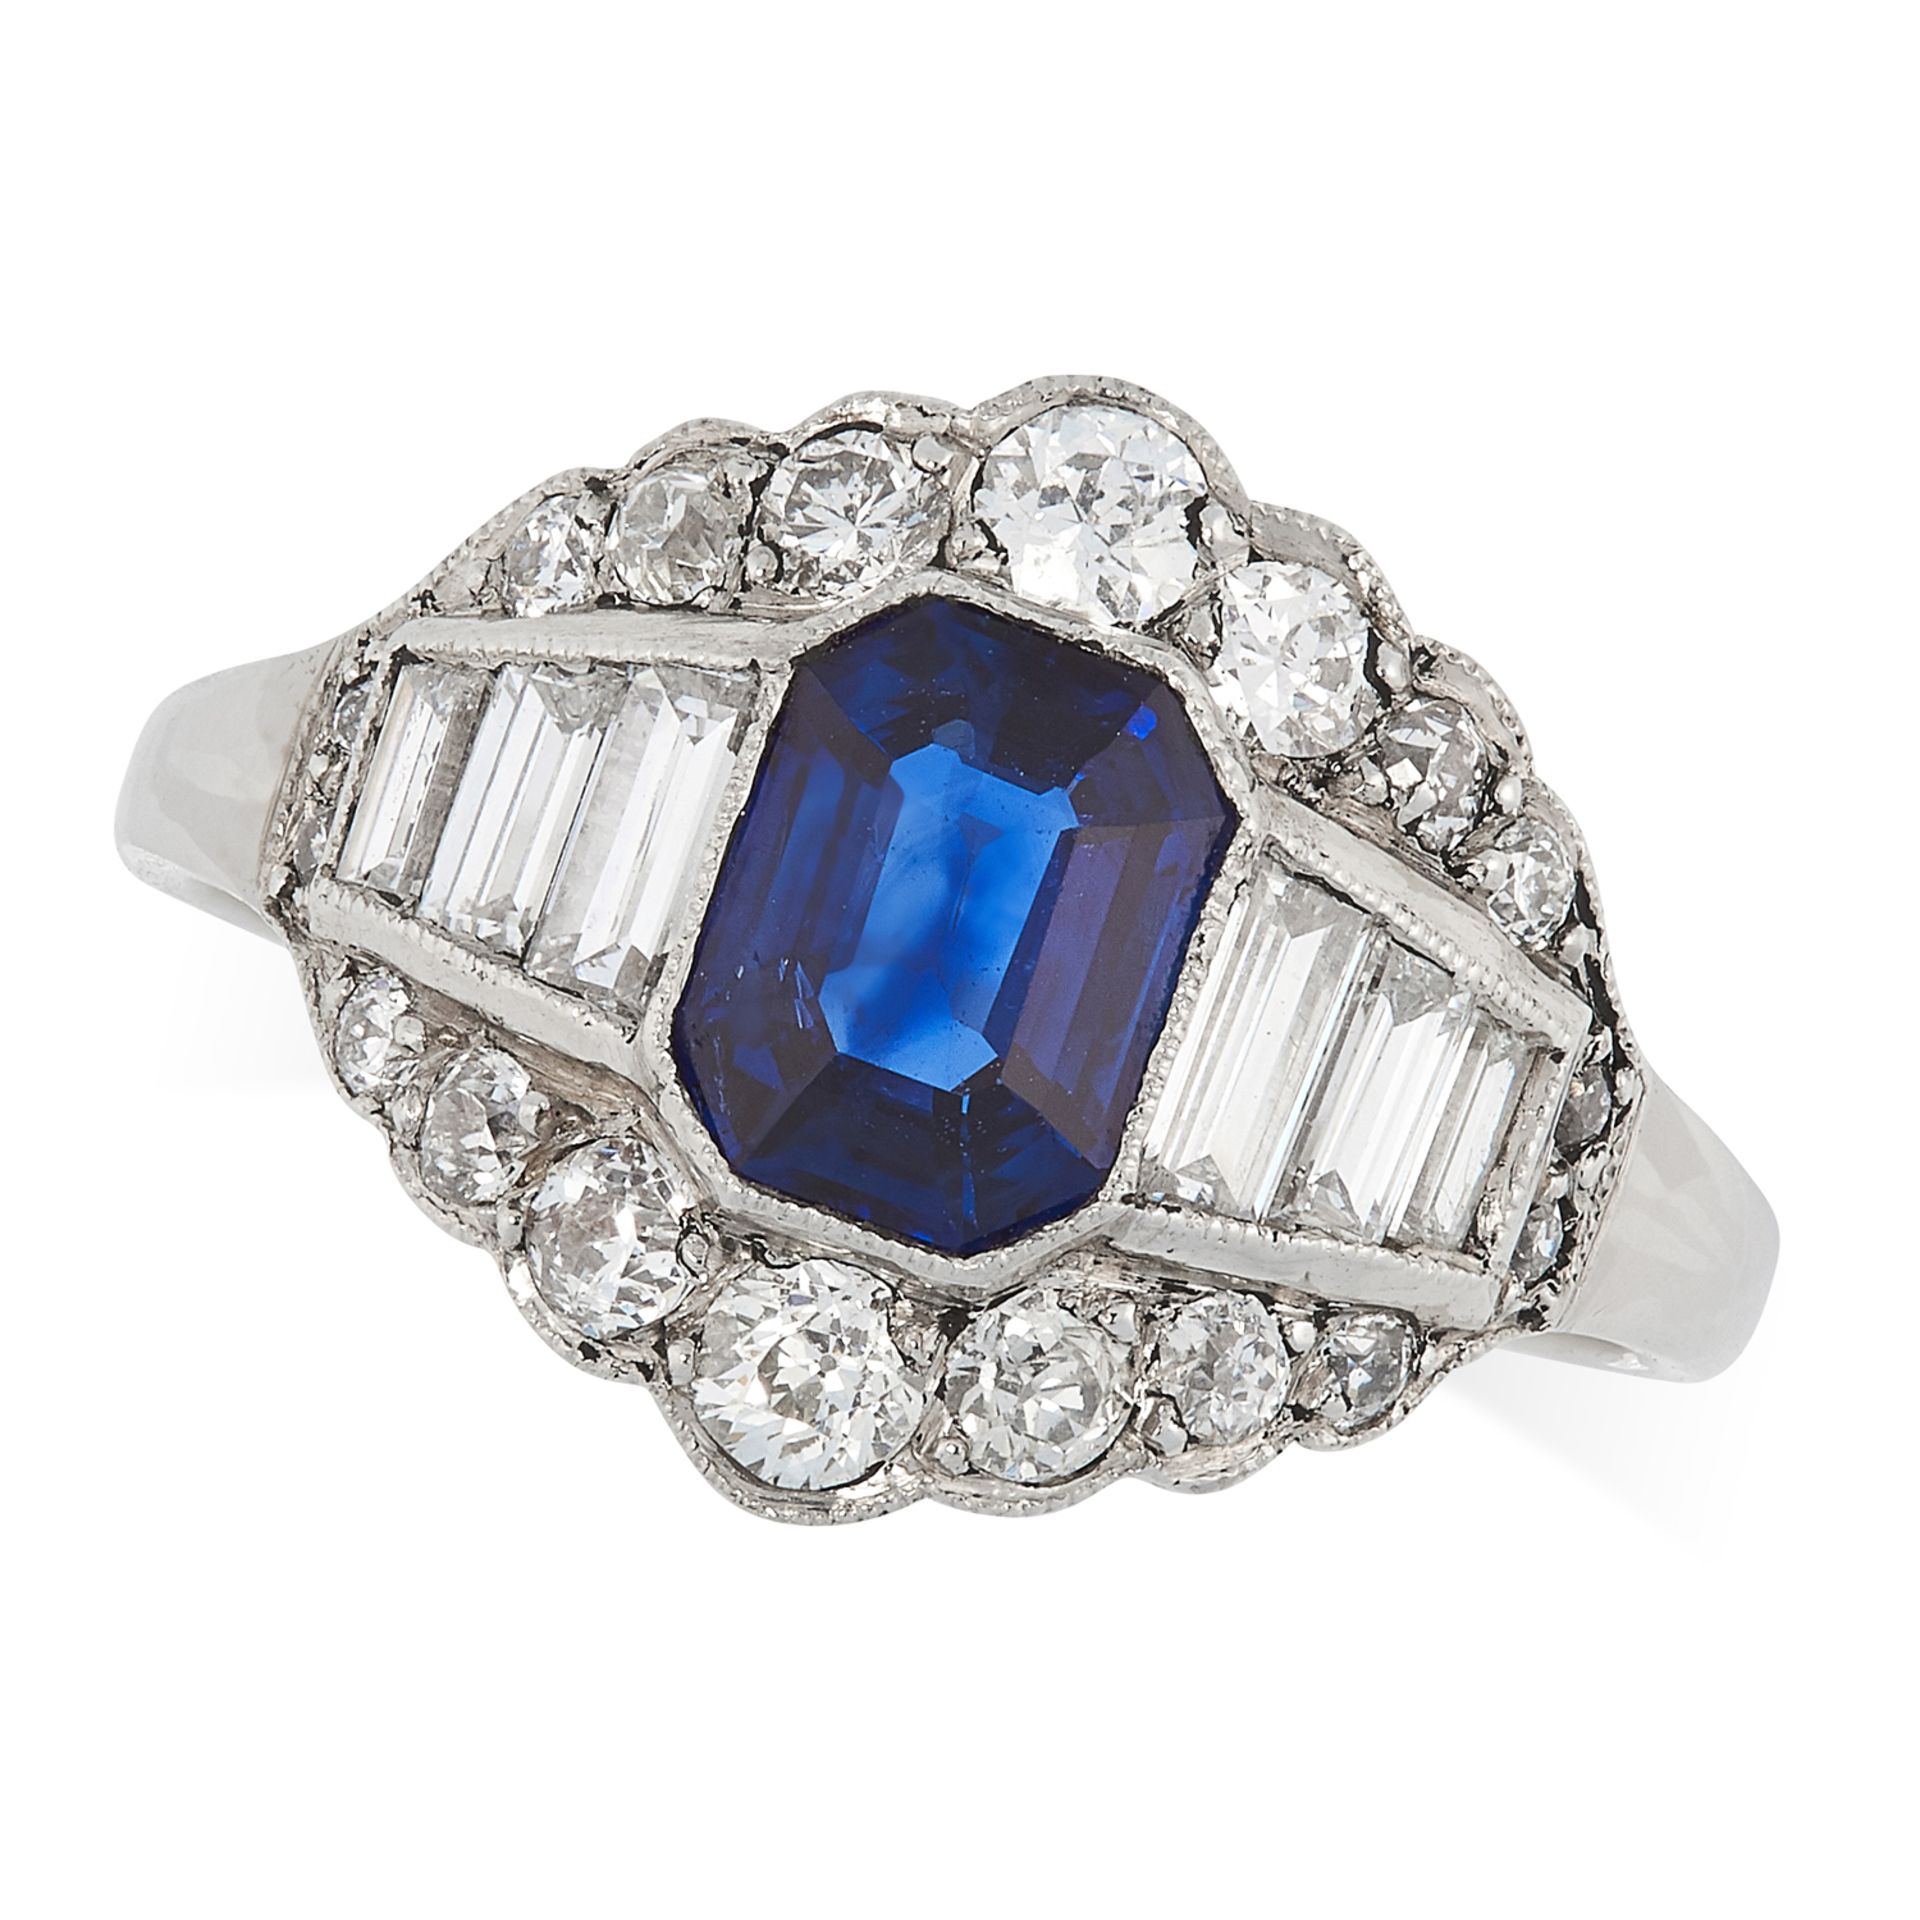 A SAPPHIRE AND DIAMOND DRESS RING set with an emerald cut sapphire, surrounded by round and baguette